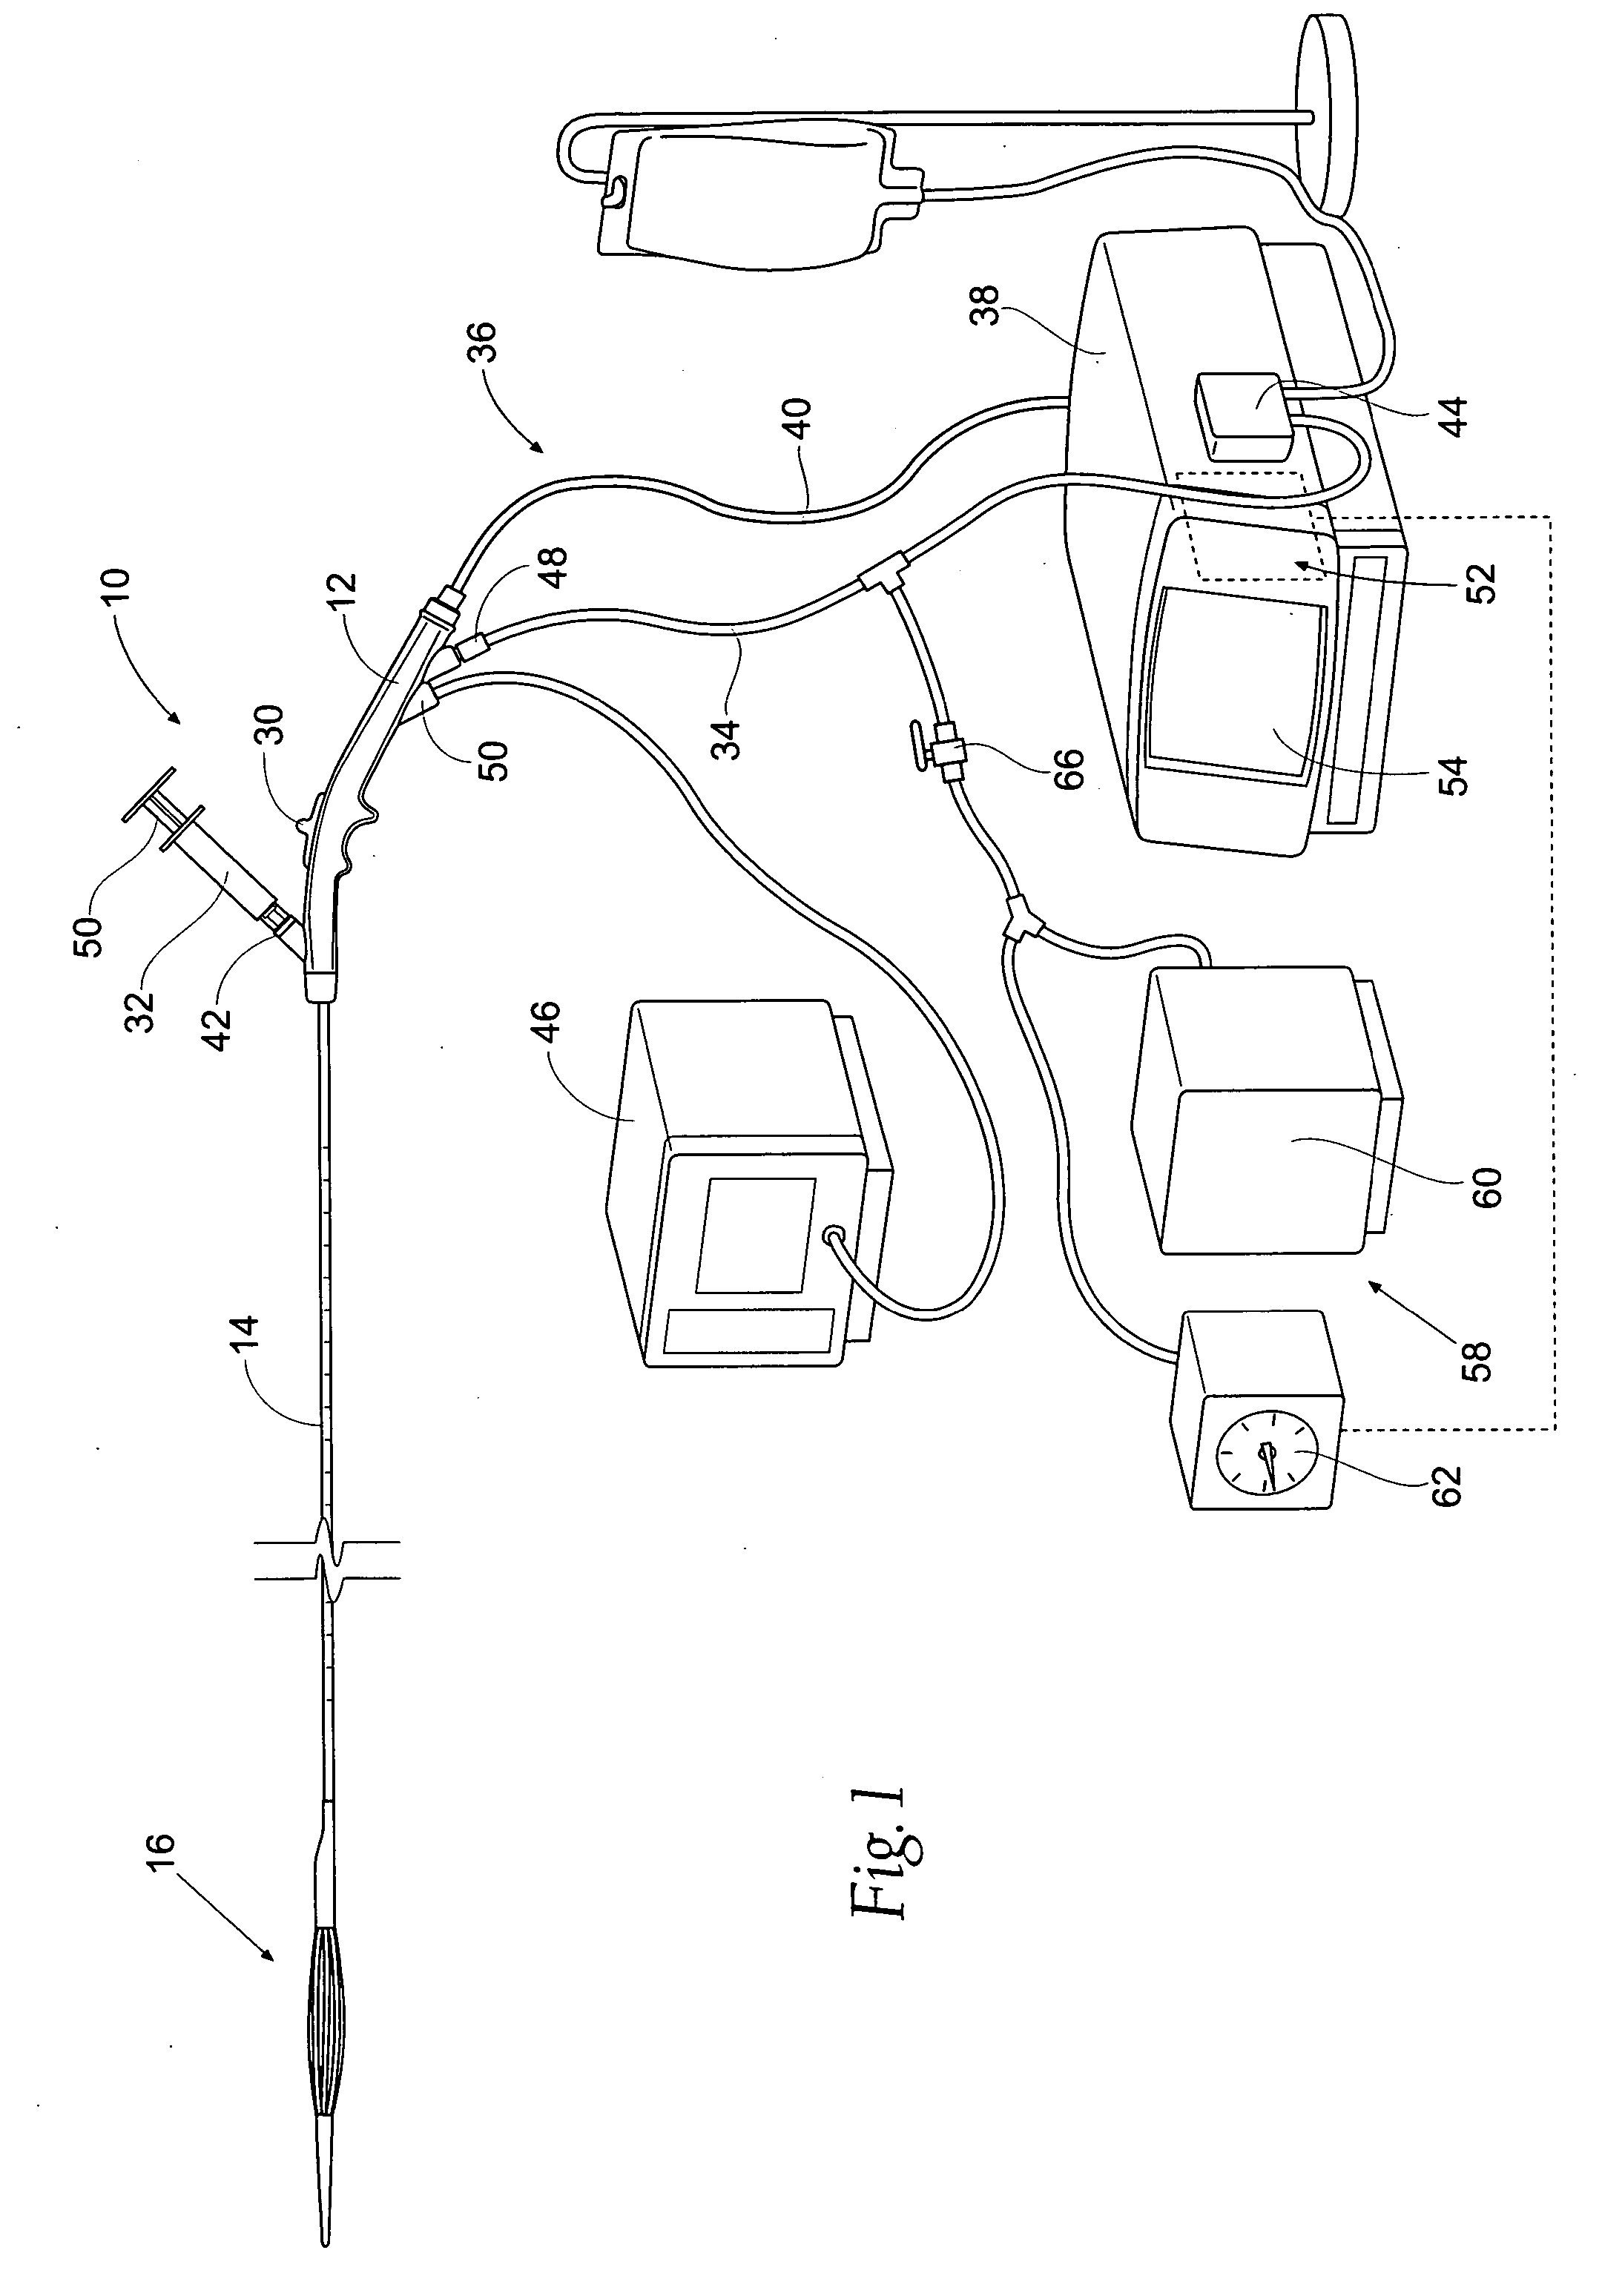 Systems and methods for treating tissue regions of the body